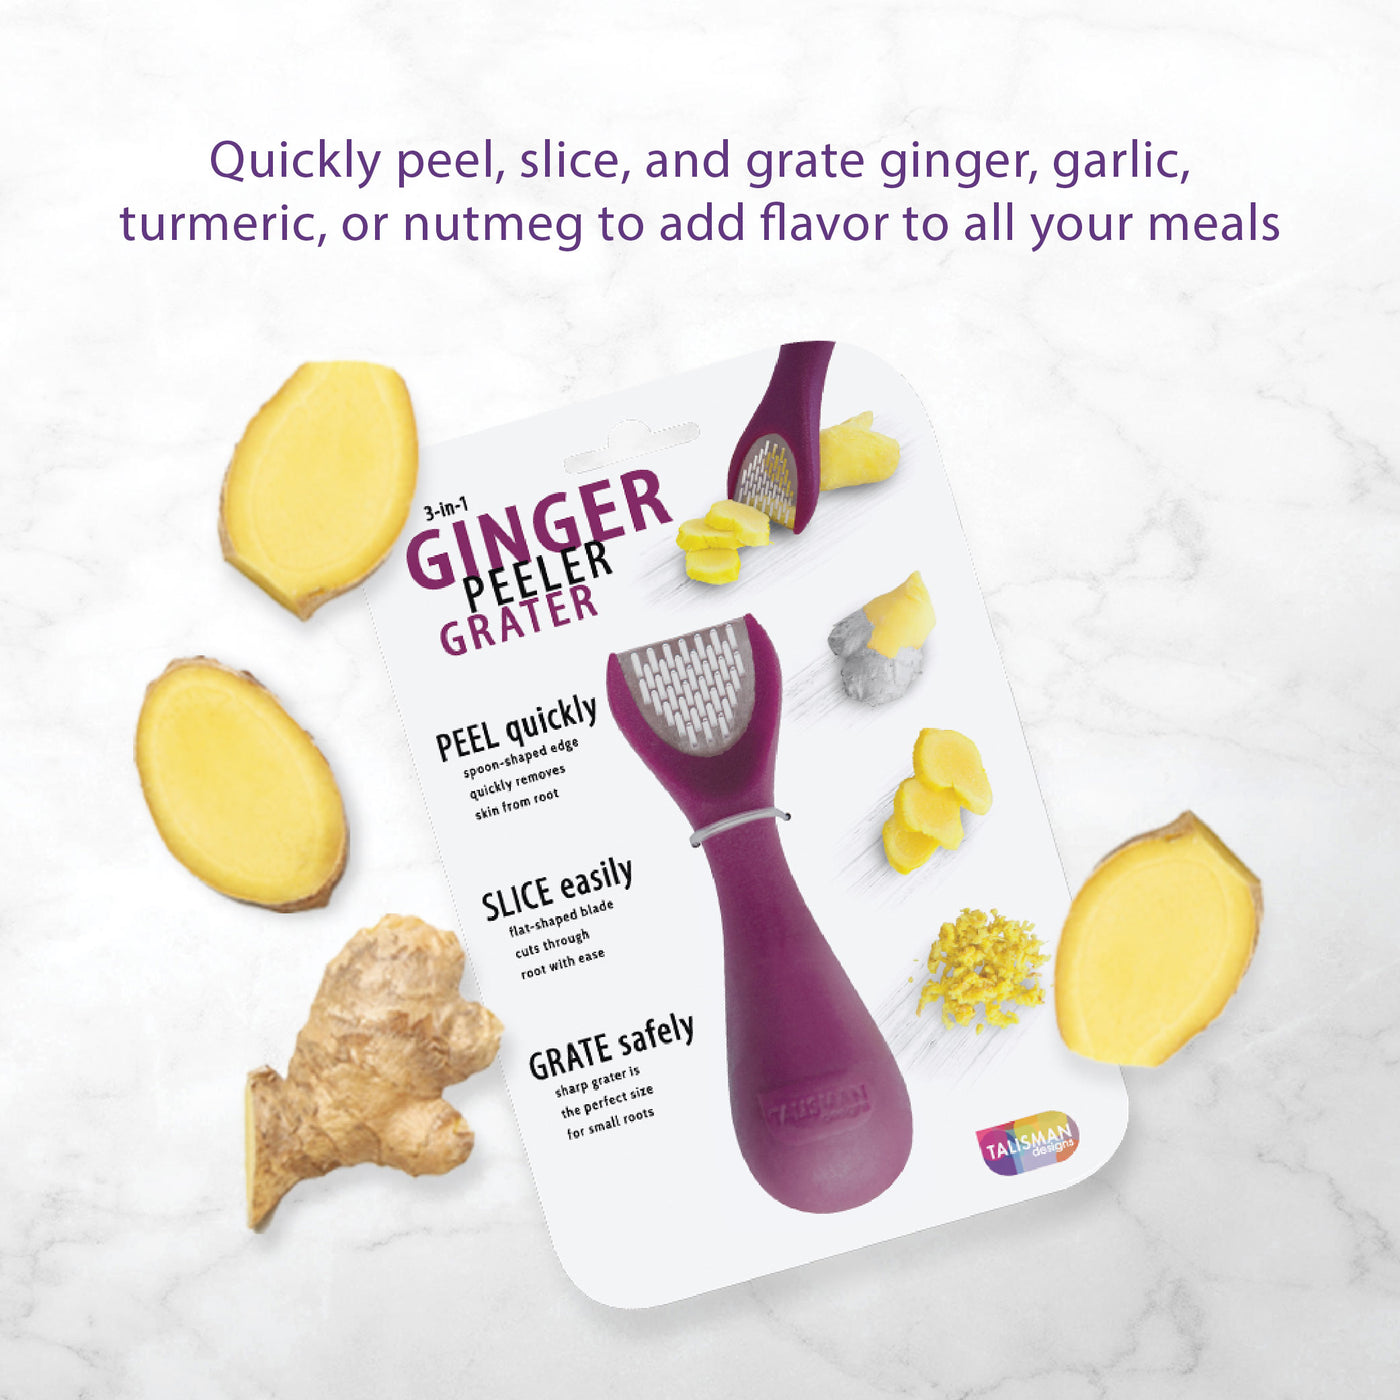 Effortlessly Grate, Slice, and Peel Ginger with Our 3-in-1 Ginger